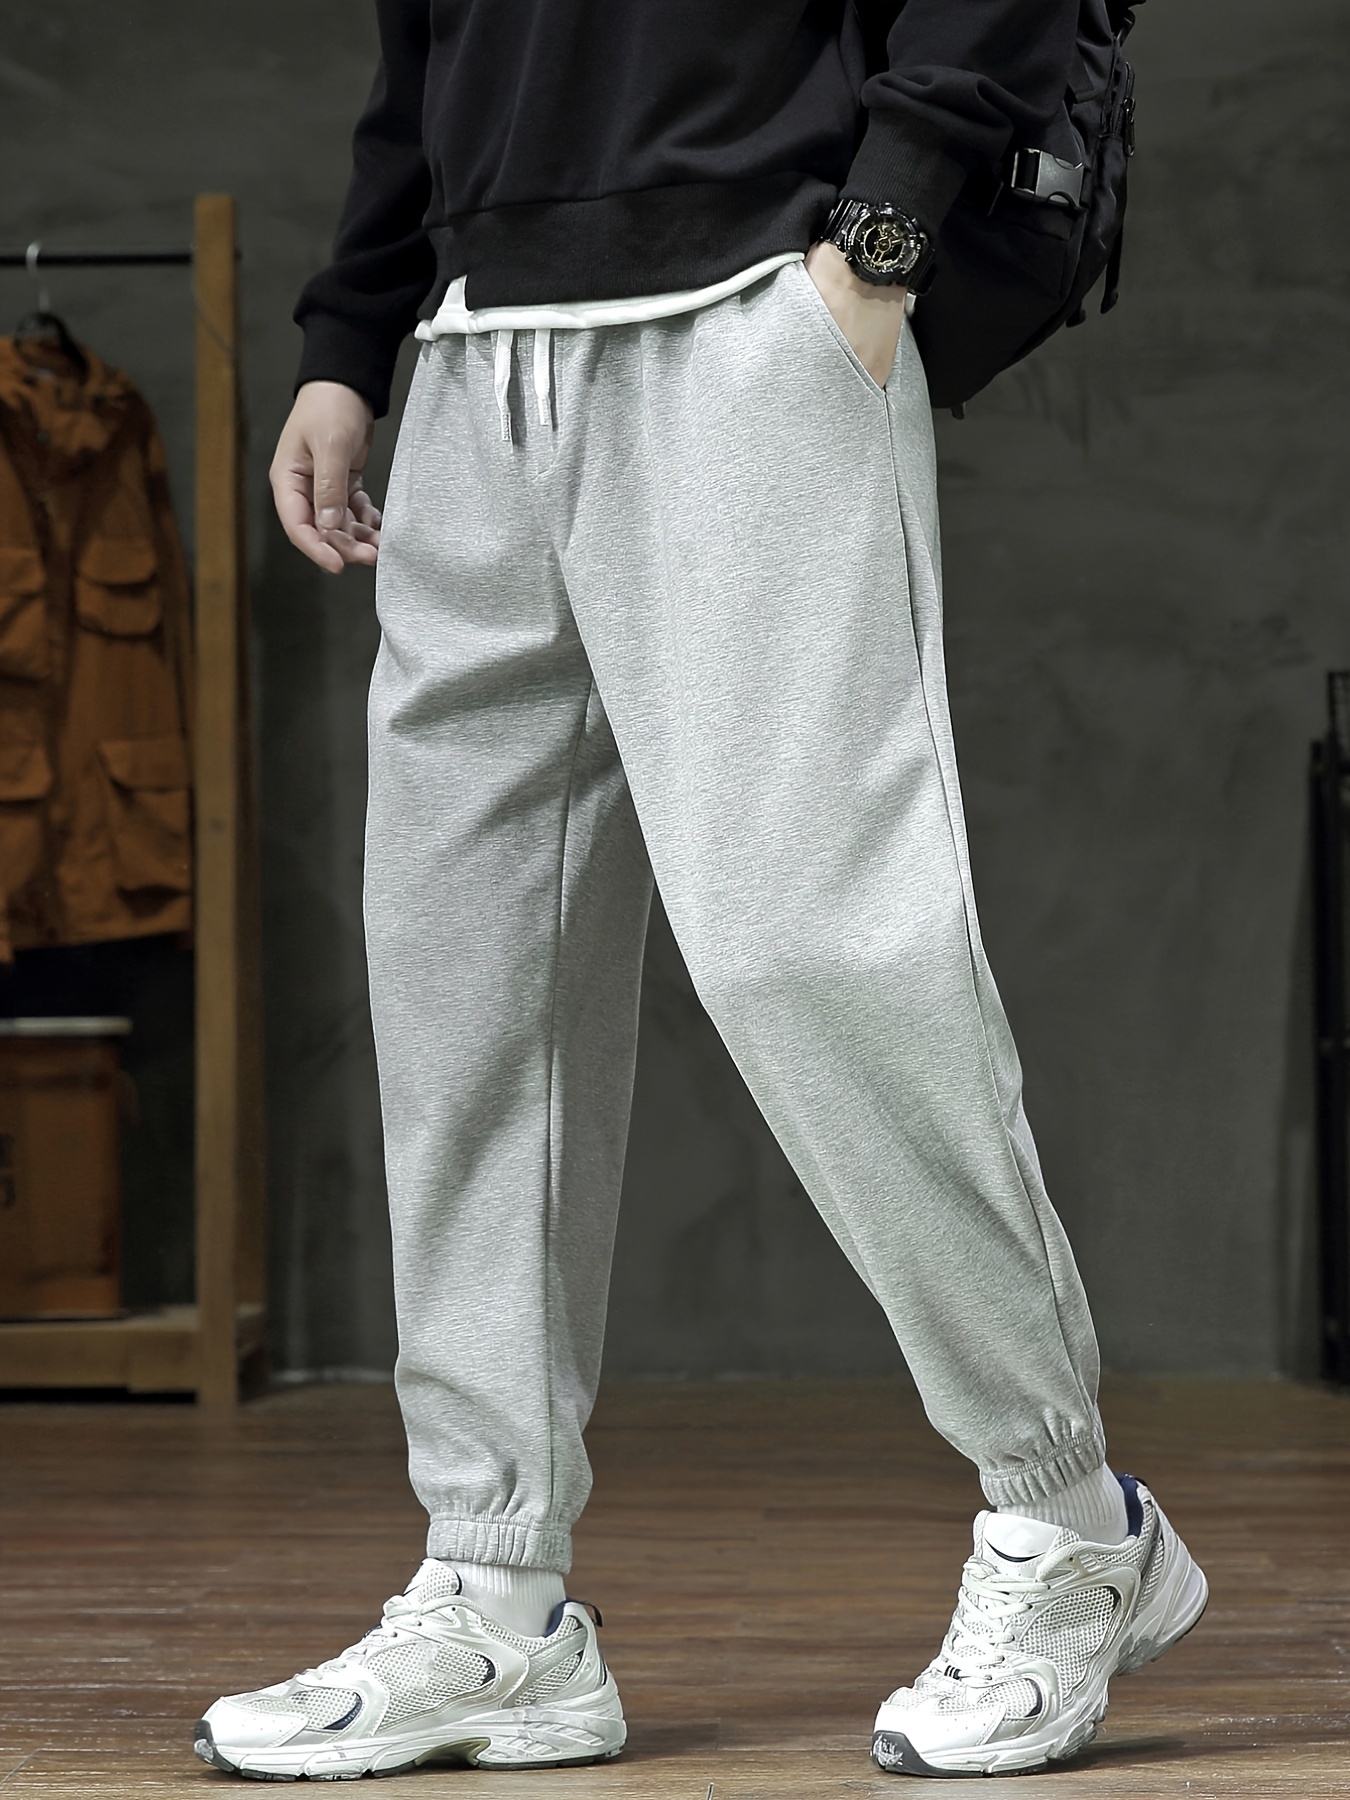 TOWED22 Mens Tall Sweatpants,Men's Lightweight Joggers Casual Slim  Sweatpants Track Pants with Zipper Pockets White,XL 